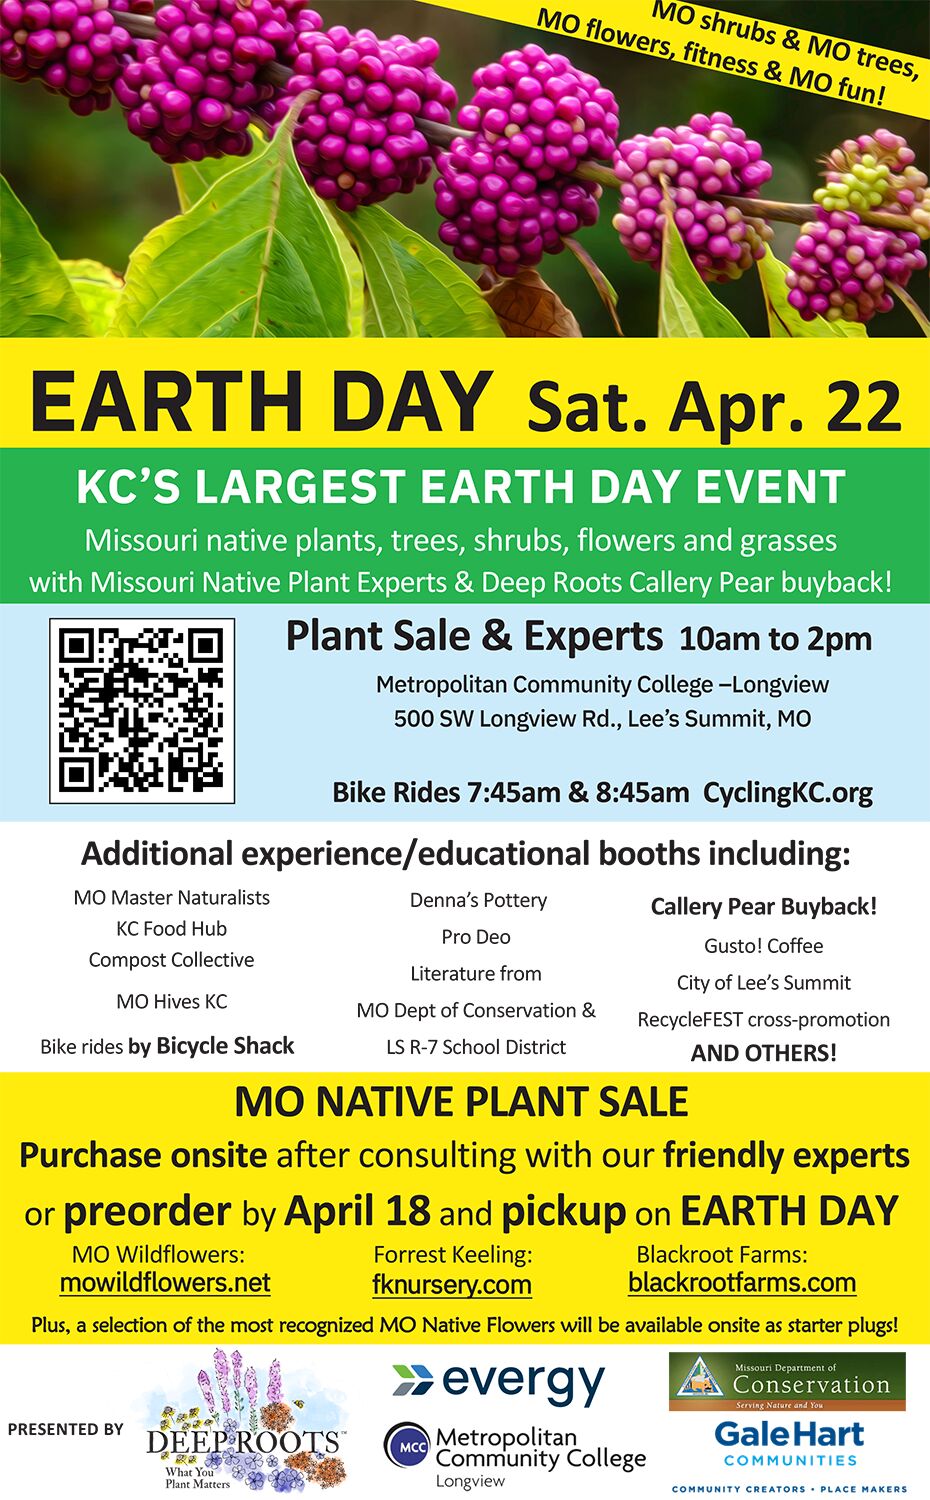 Local companies teaming up for Earth Day event and native plant sale | Arts  & Entertainment 